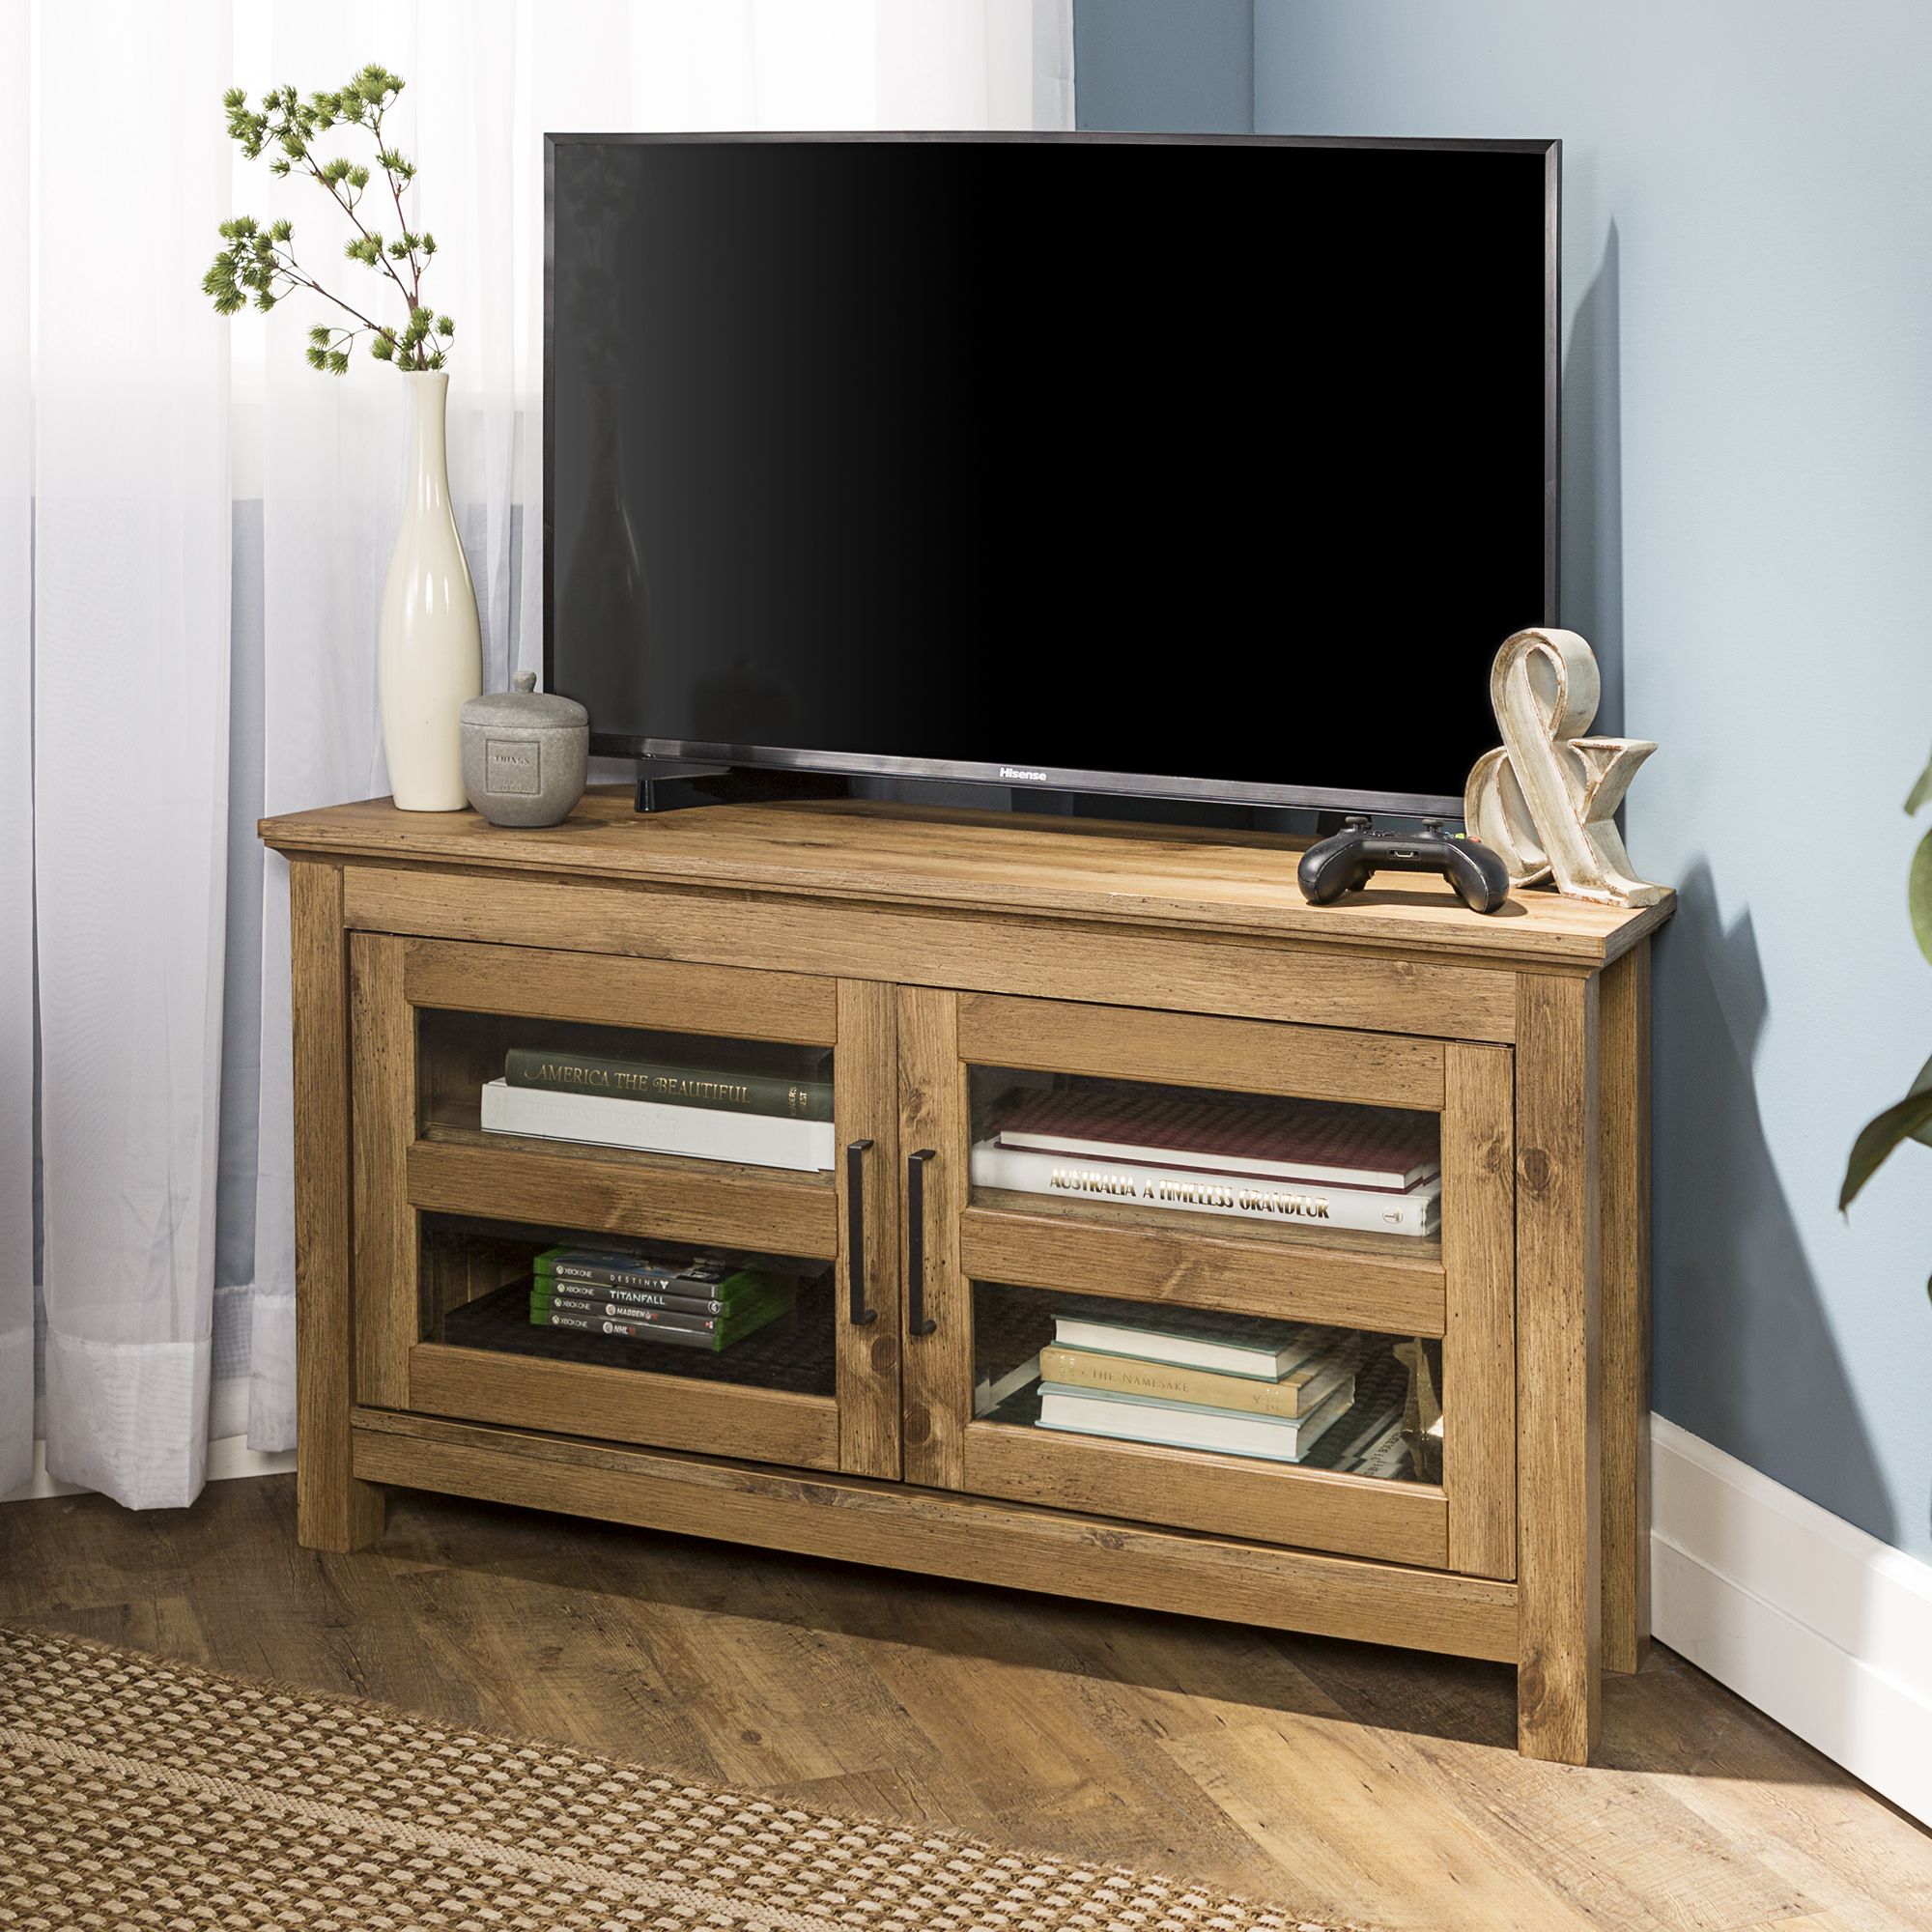 44" Wood Corner Tv Media Stand Storage Console – Barnwood In Wooden Corner Tv Cabinets (View 3 of 15)